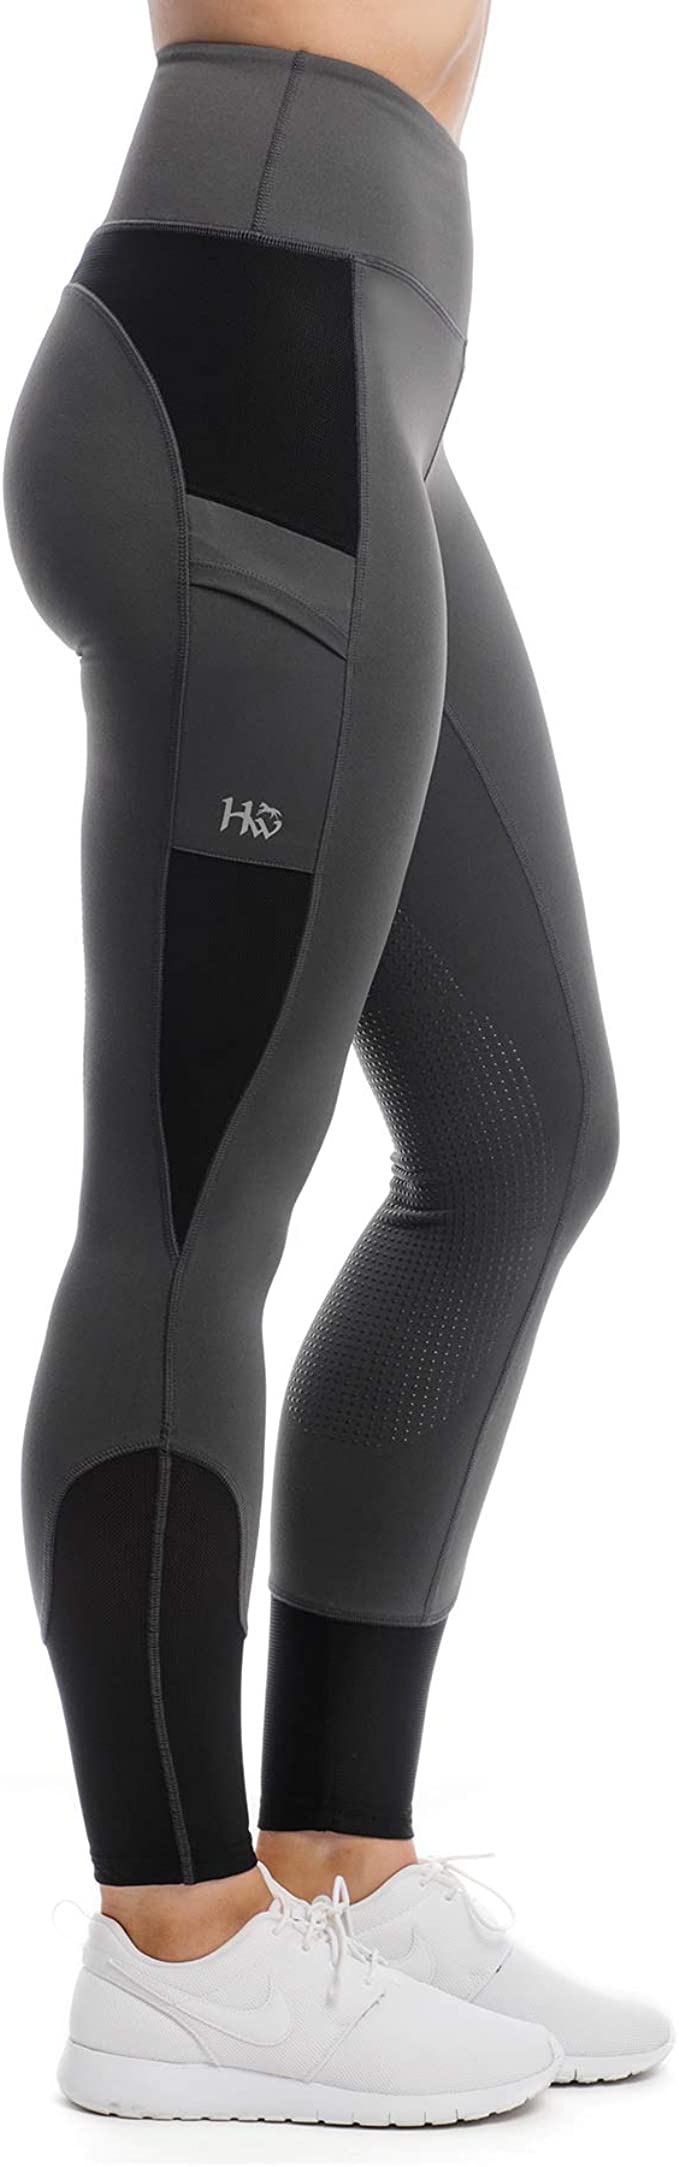 Charcoal Horseware Women's Silicon Riding Tights